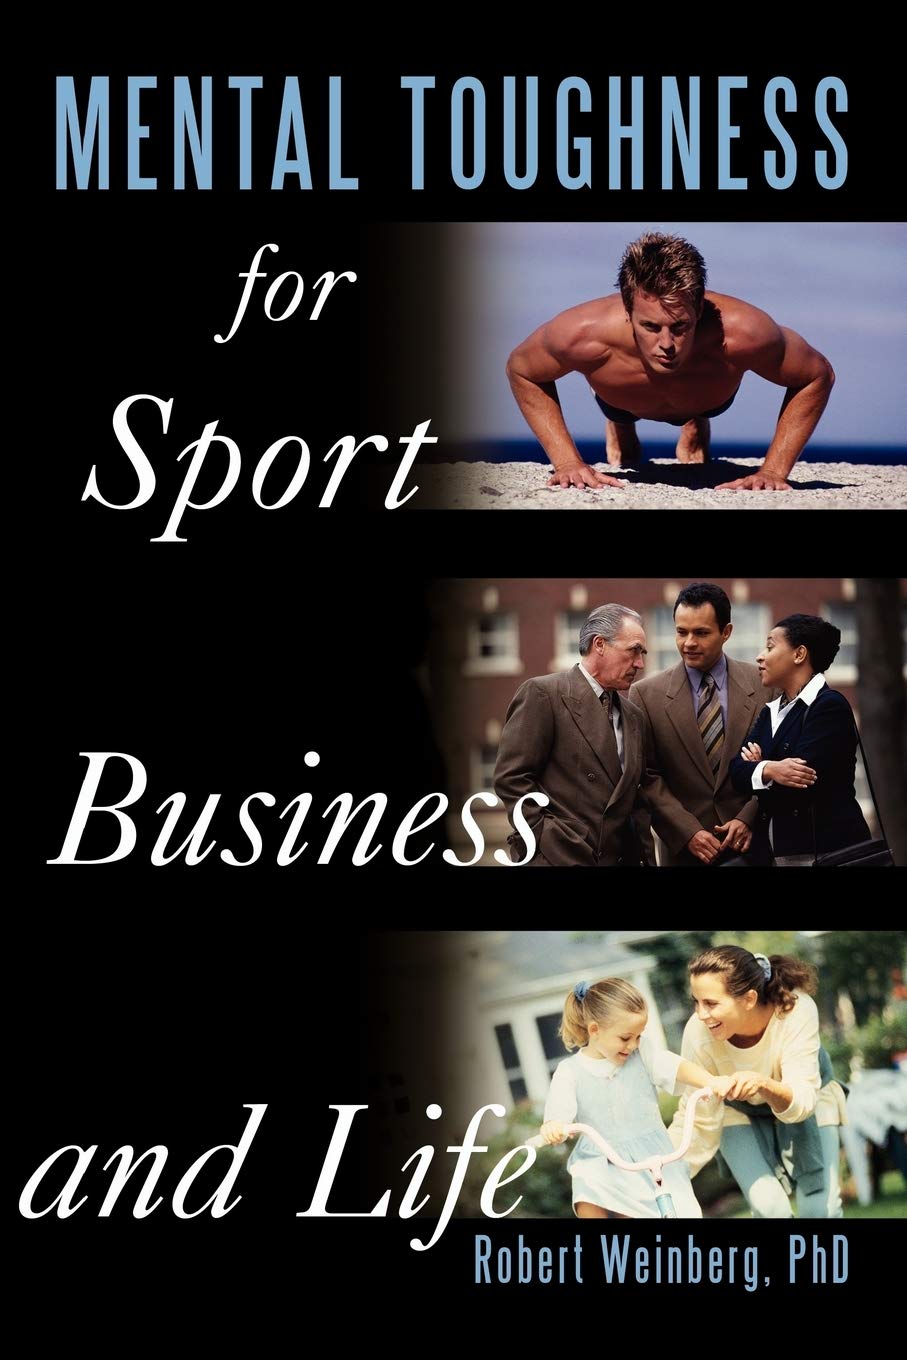 Mental Toughness for Sport Business and Life textbook cover